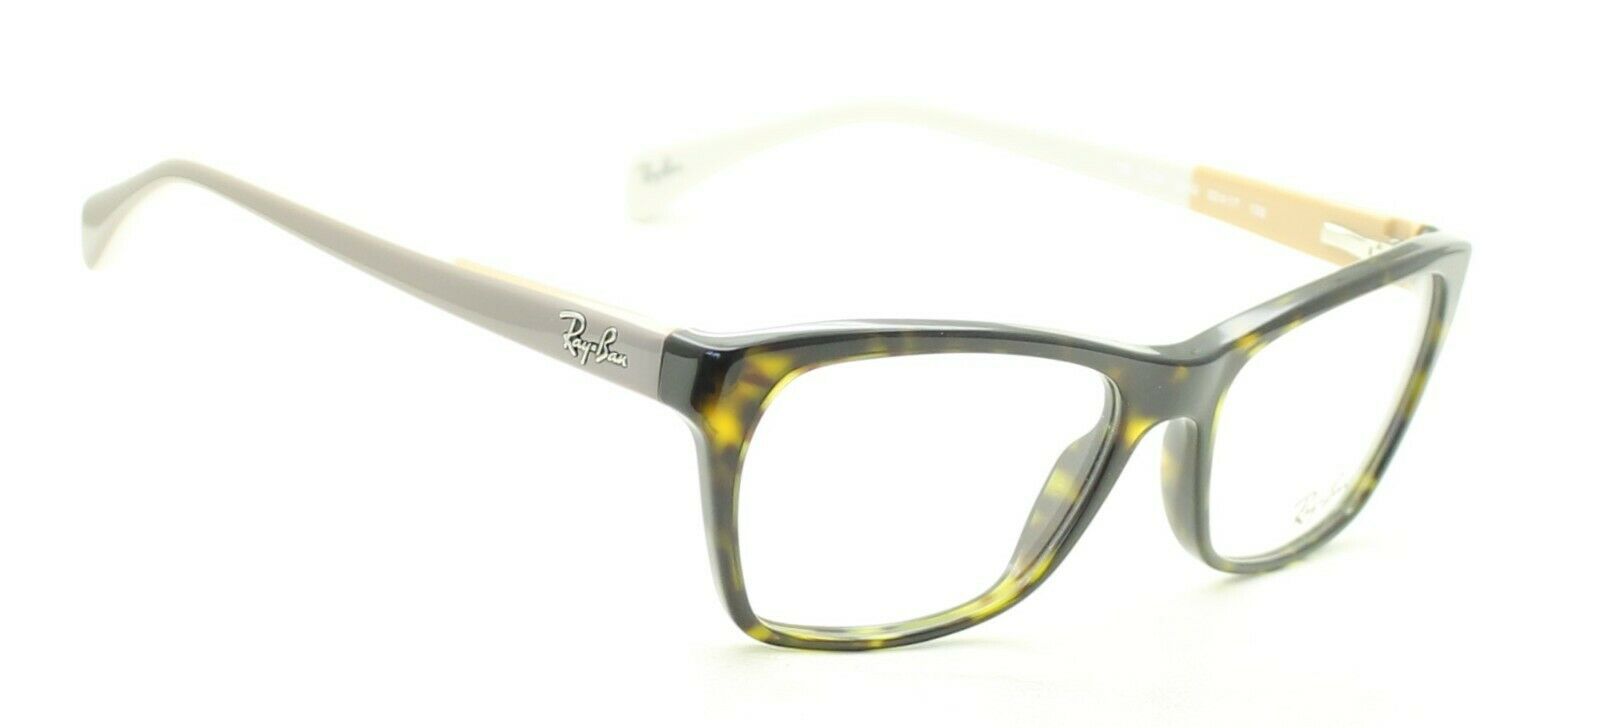 RAY BAN RB 5298 5549 53mm FRAMES RAYBAN Glasses RX Optical Eyewear New - TRUSTED